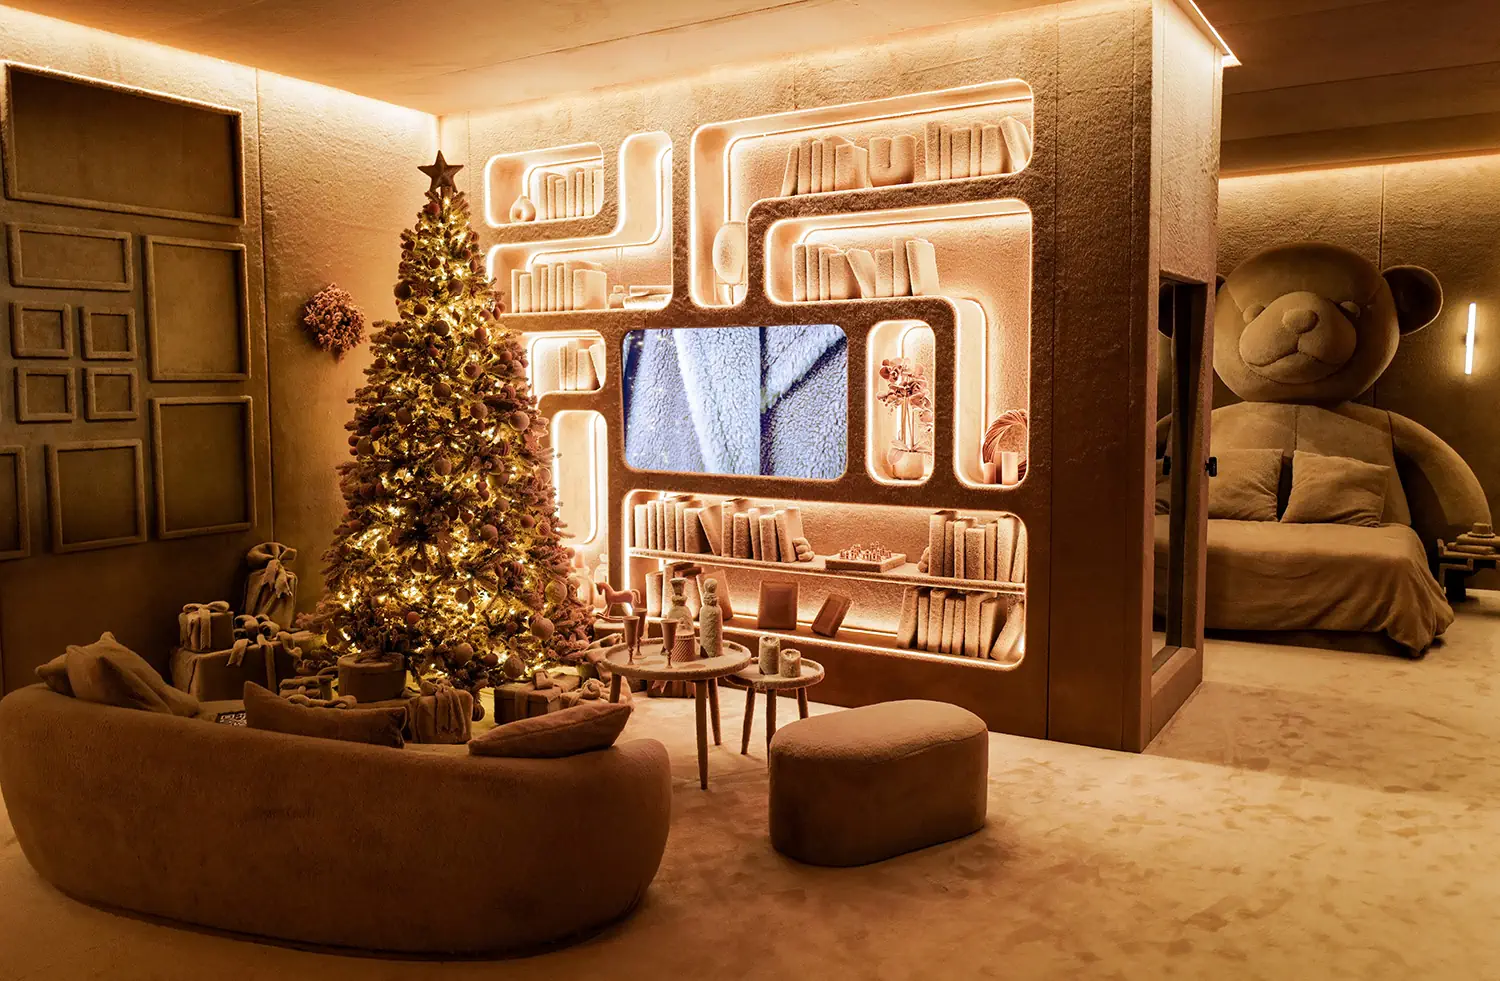 Embrace the Teddy Bear charm at Max Mara's Fluffy Residence in London